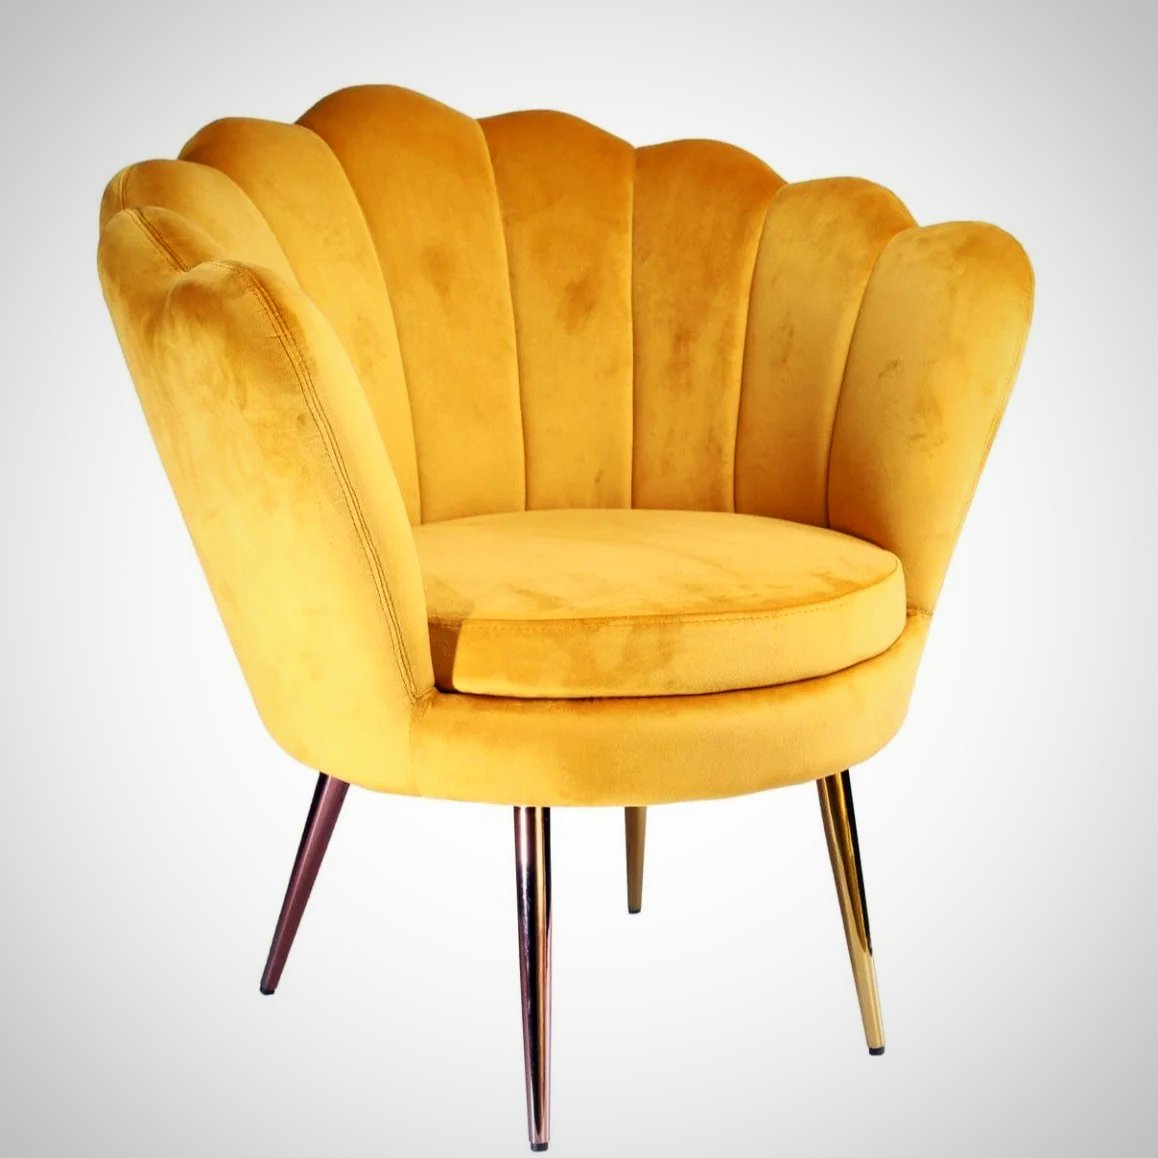 Seany Accent Chair